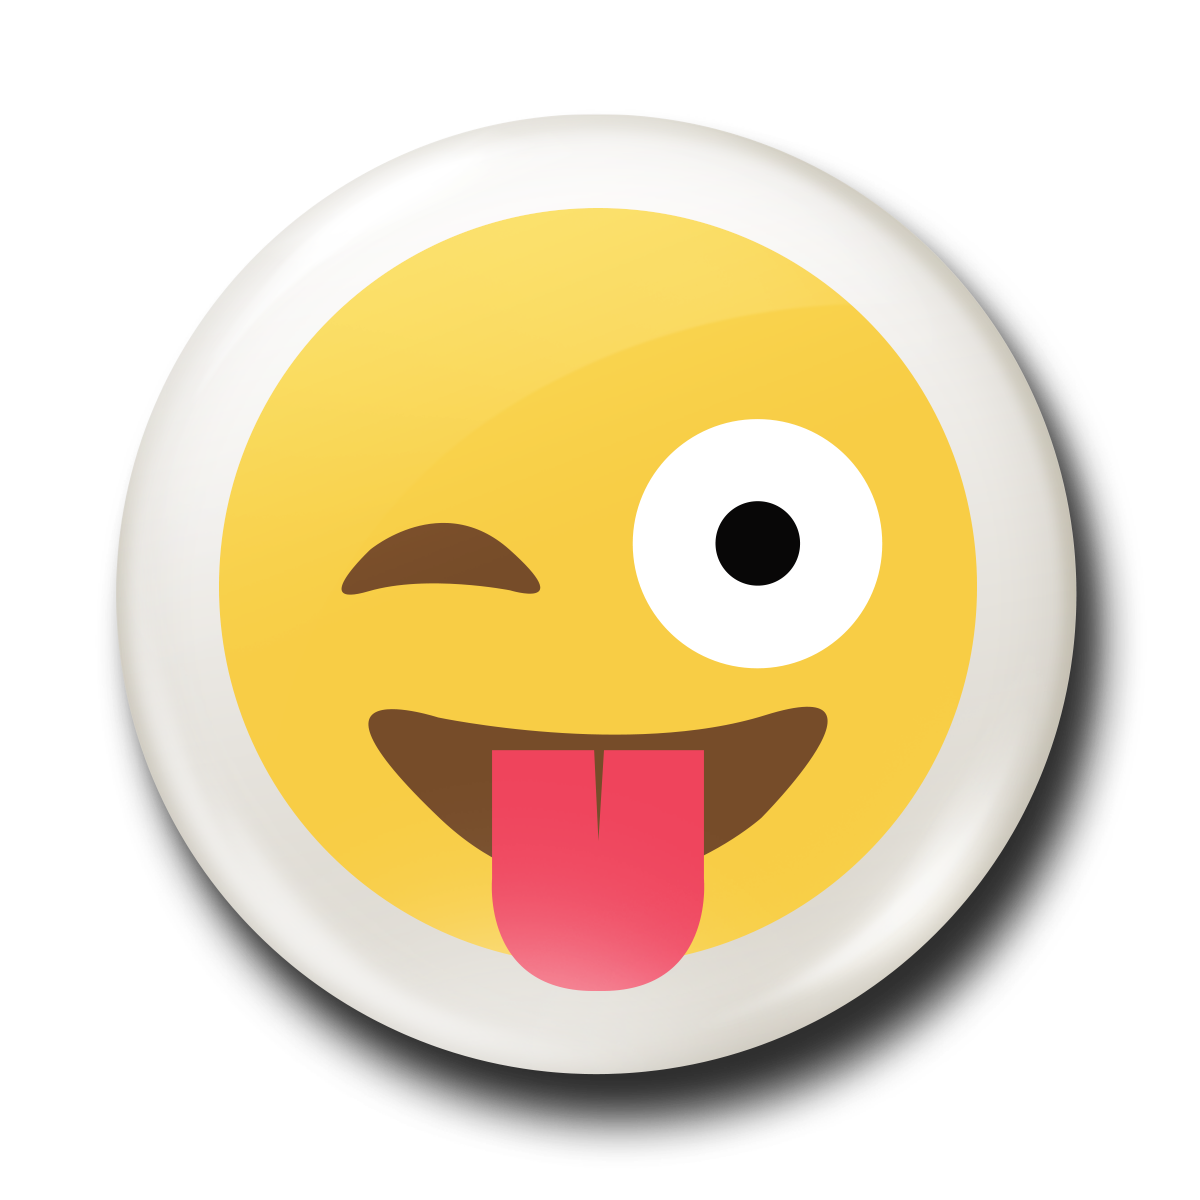 Tongue Out Emoji Transparent #1564484 (License: Personal Use) .